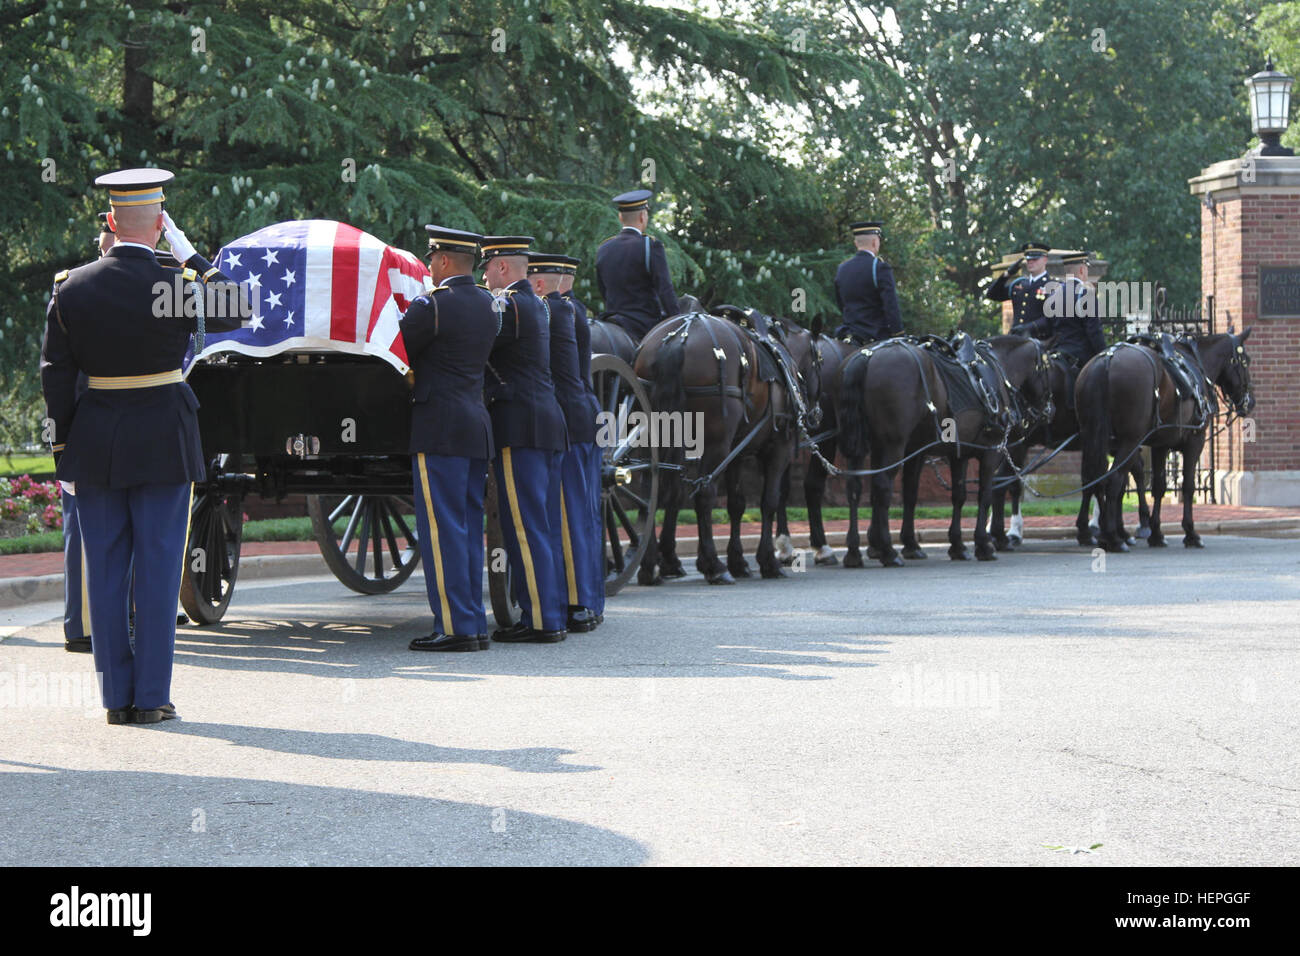 Soldiers of the Honor Guard raise the casket of Army Reserve Lt. Col. Todd Douglas Thomson onto the horse drawn carriage at Arlington National Cemetery, Va., July 1, 2015. Approximately 26 funerals occur each day at Arlington. (U.S. Army photo by Staff Sgt. Kai L. Jensen, 76th Operational Response Command) Husband, father, Soldier laid to rest at Arlington 150701-A-AM439-027 Stock Photo